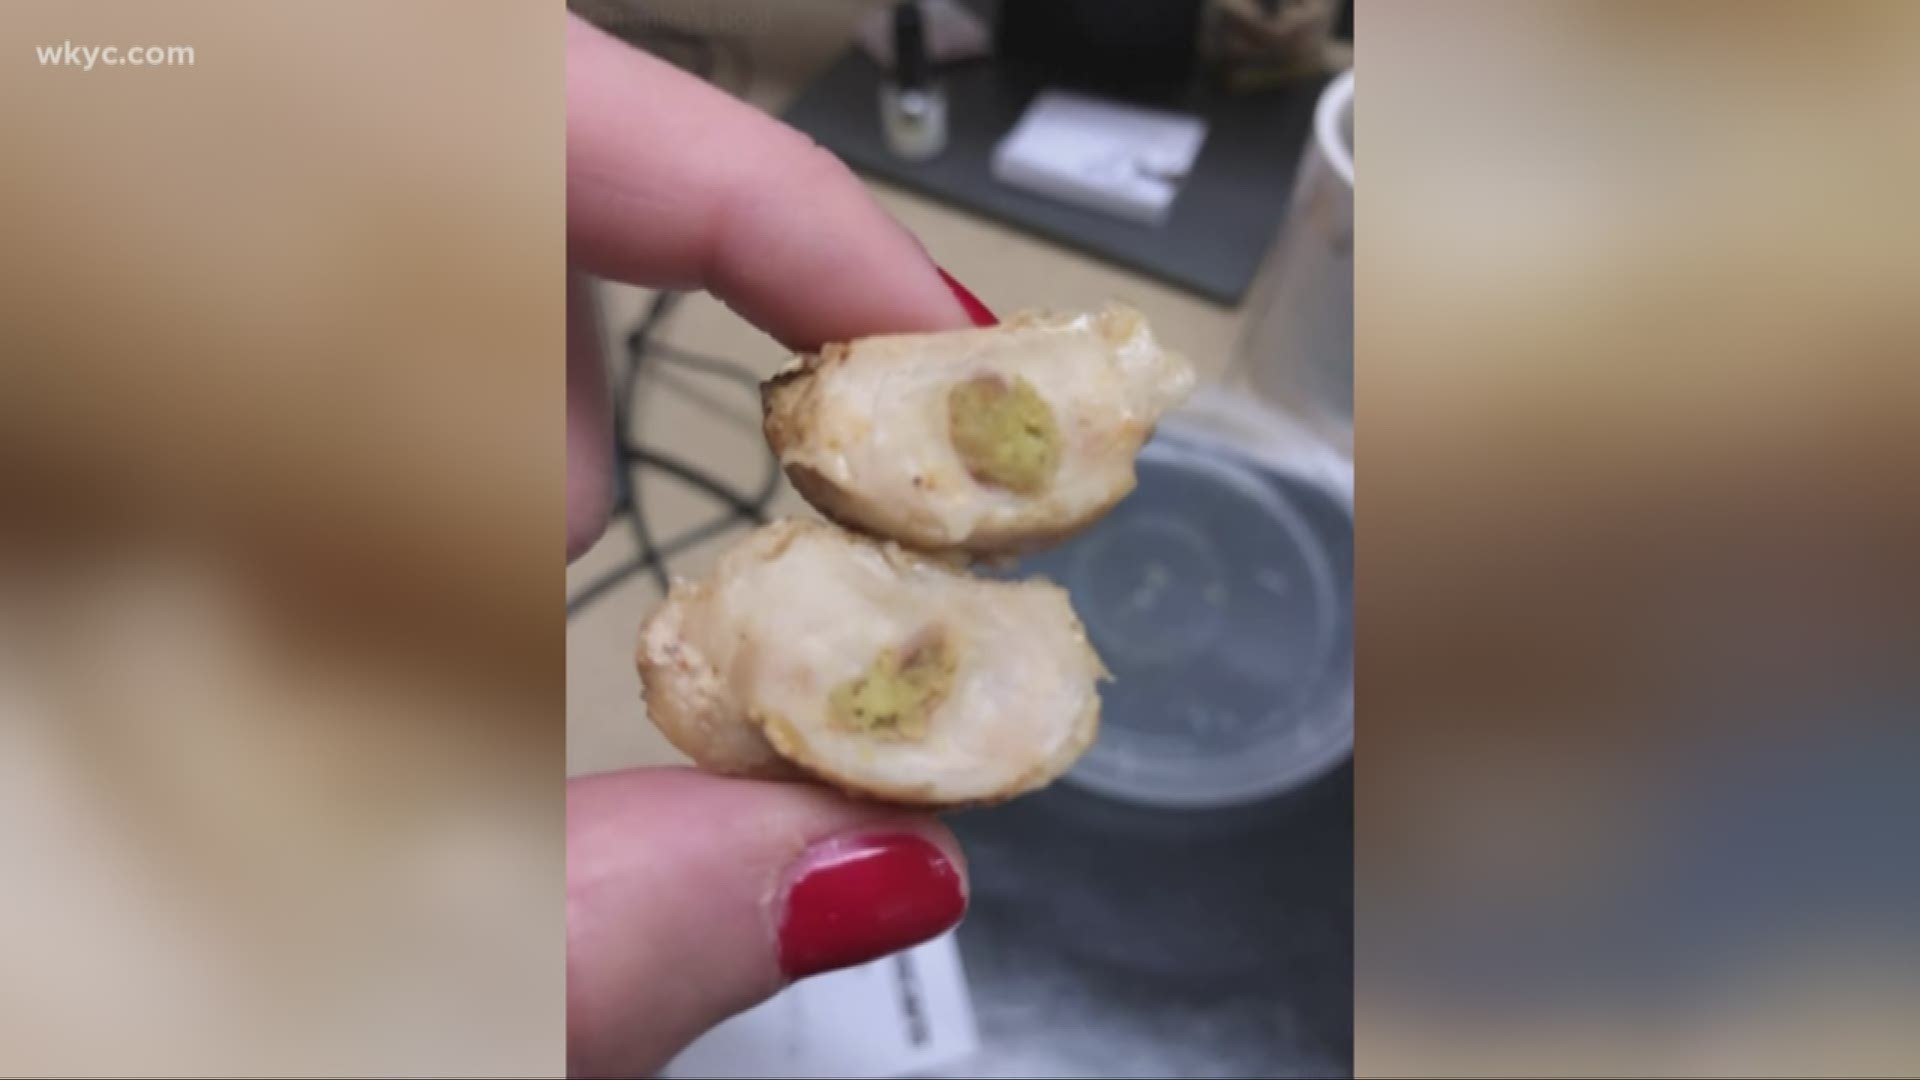 Woman discovers mysterious substance inside chicken